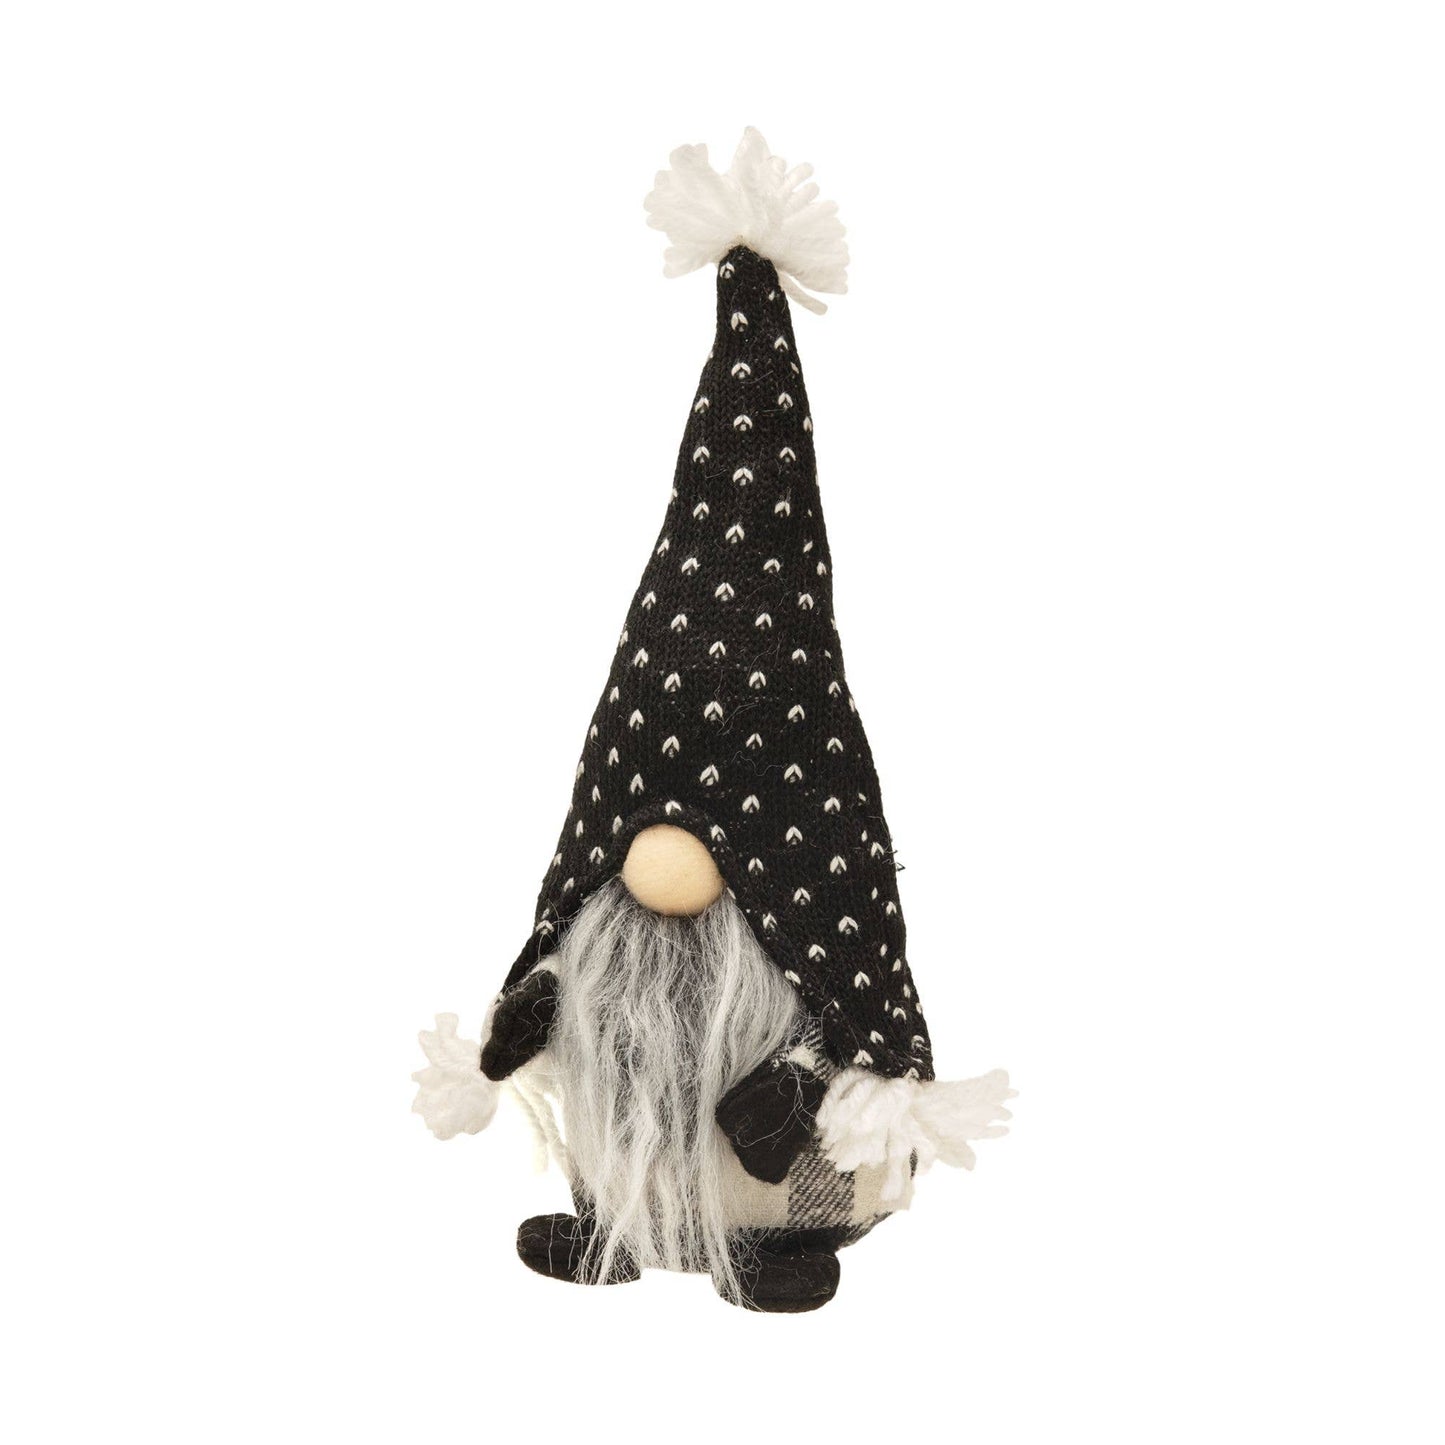 Sm Standing Grey Beard Gnome w/Spotted Hat